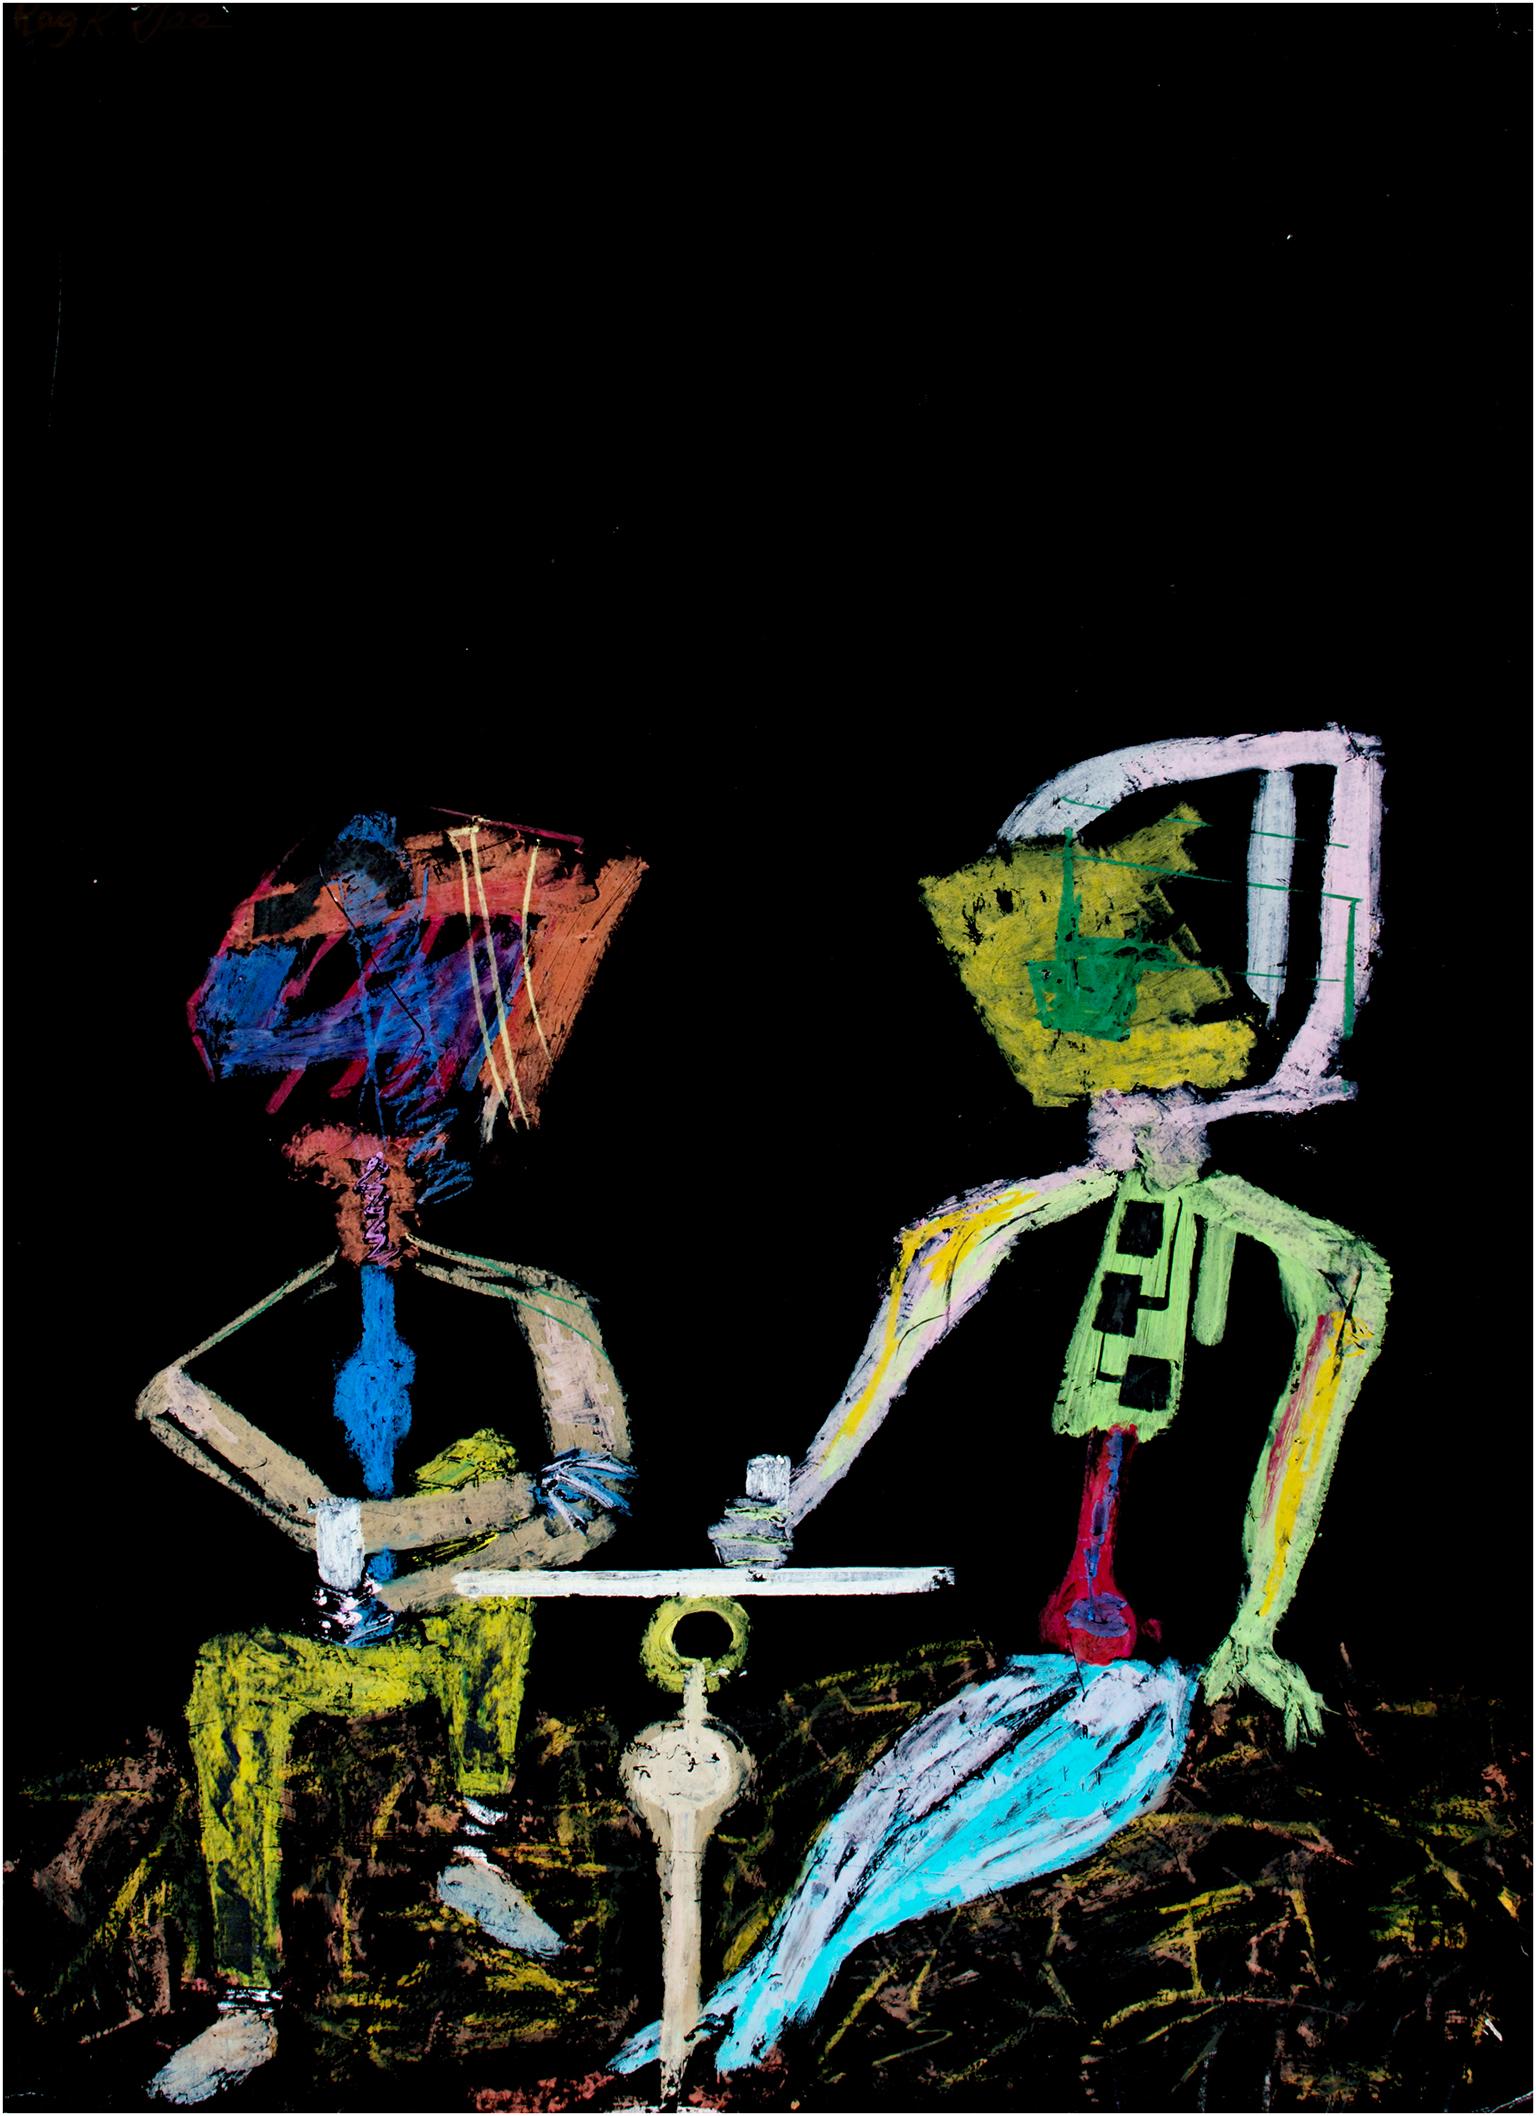 "Two of the Controlling Members" is an original oil pastel drawing on board by Reginald K. Gee. The artist signed the piece upper left. This artwork features two figures seated at a table. The figures are abstracted and almost machine-like. The